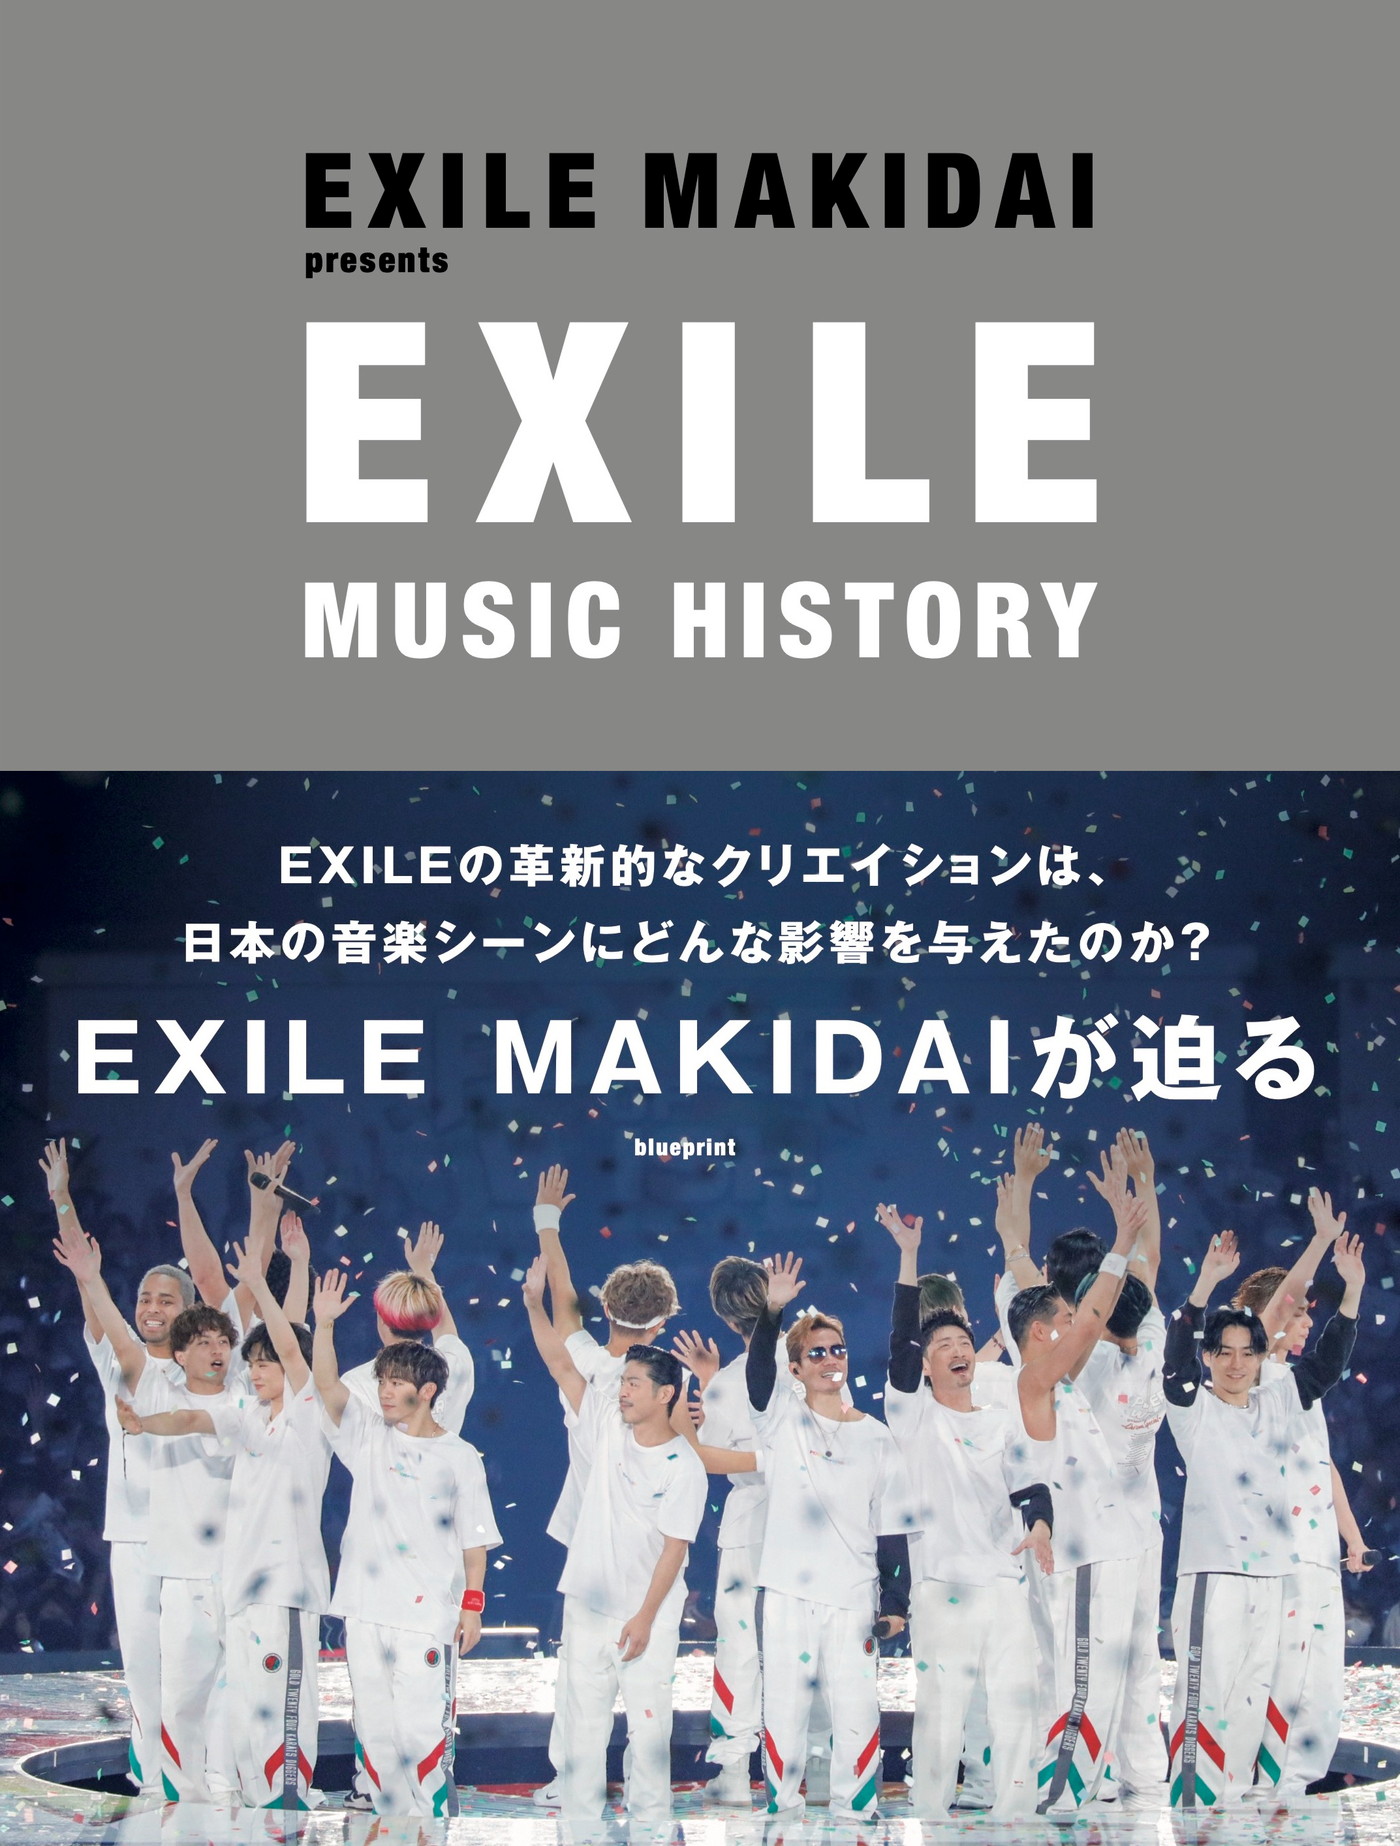 EXILE MAKIDAI、書籍『EXILE MUSIC HIS-TORY』発売決定！ EXILE ATSUSHIや倖田來未ら11名との対談収録